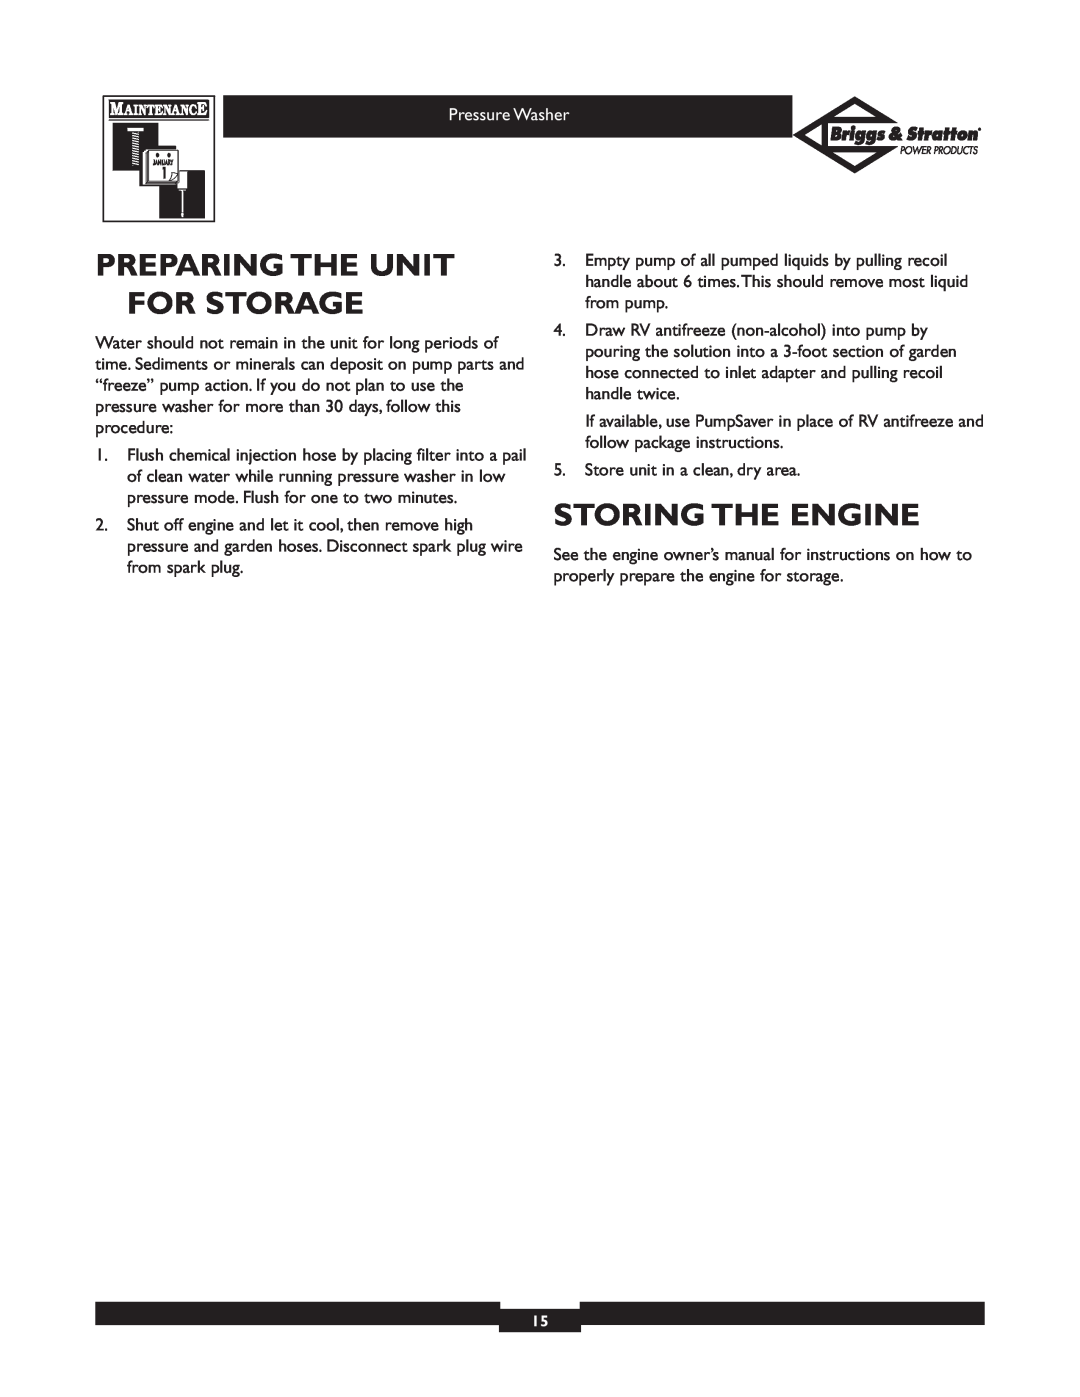 Briggs & Stratton 01936 owner manual Preparing The Unit For Storage, Storing The Engine 